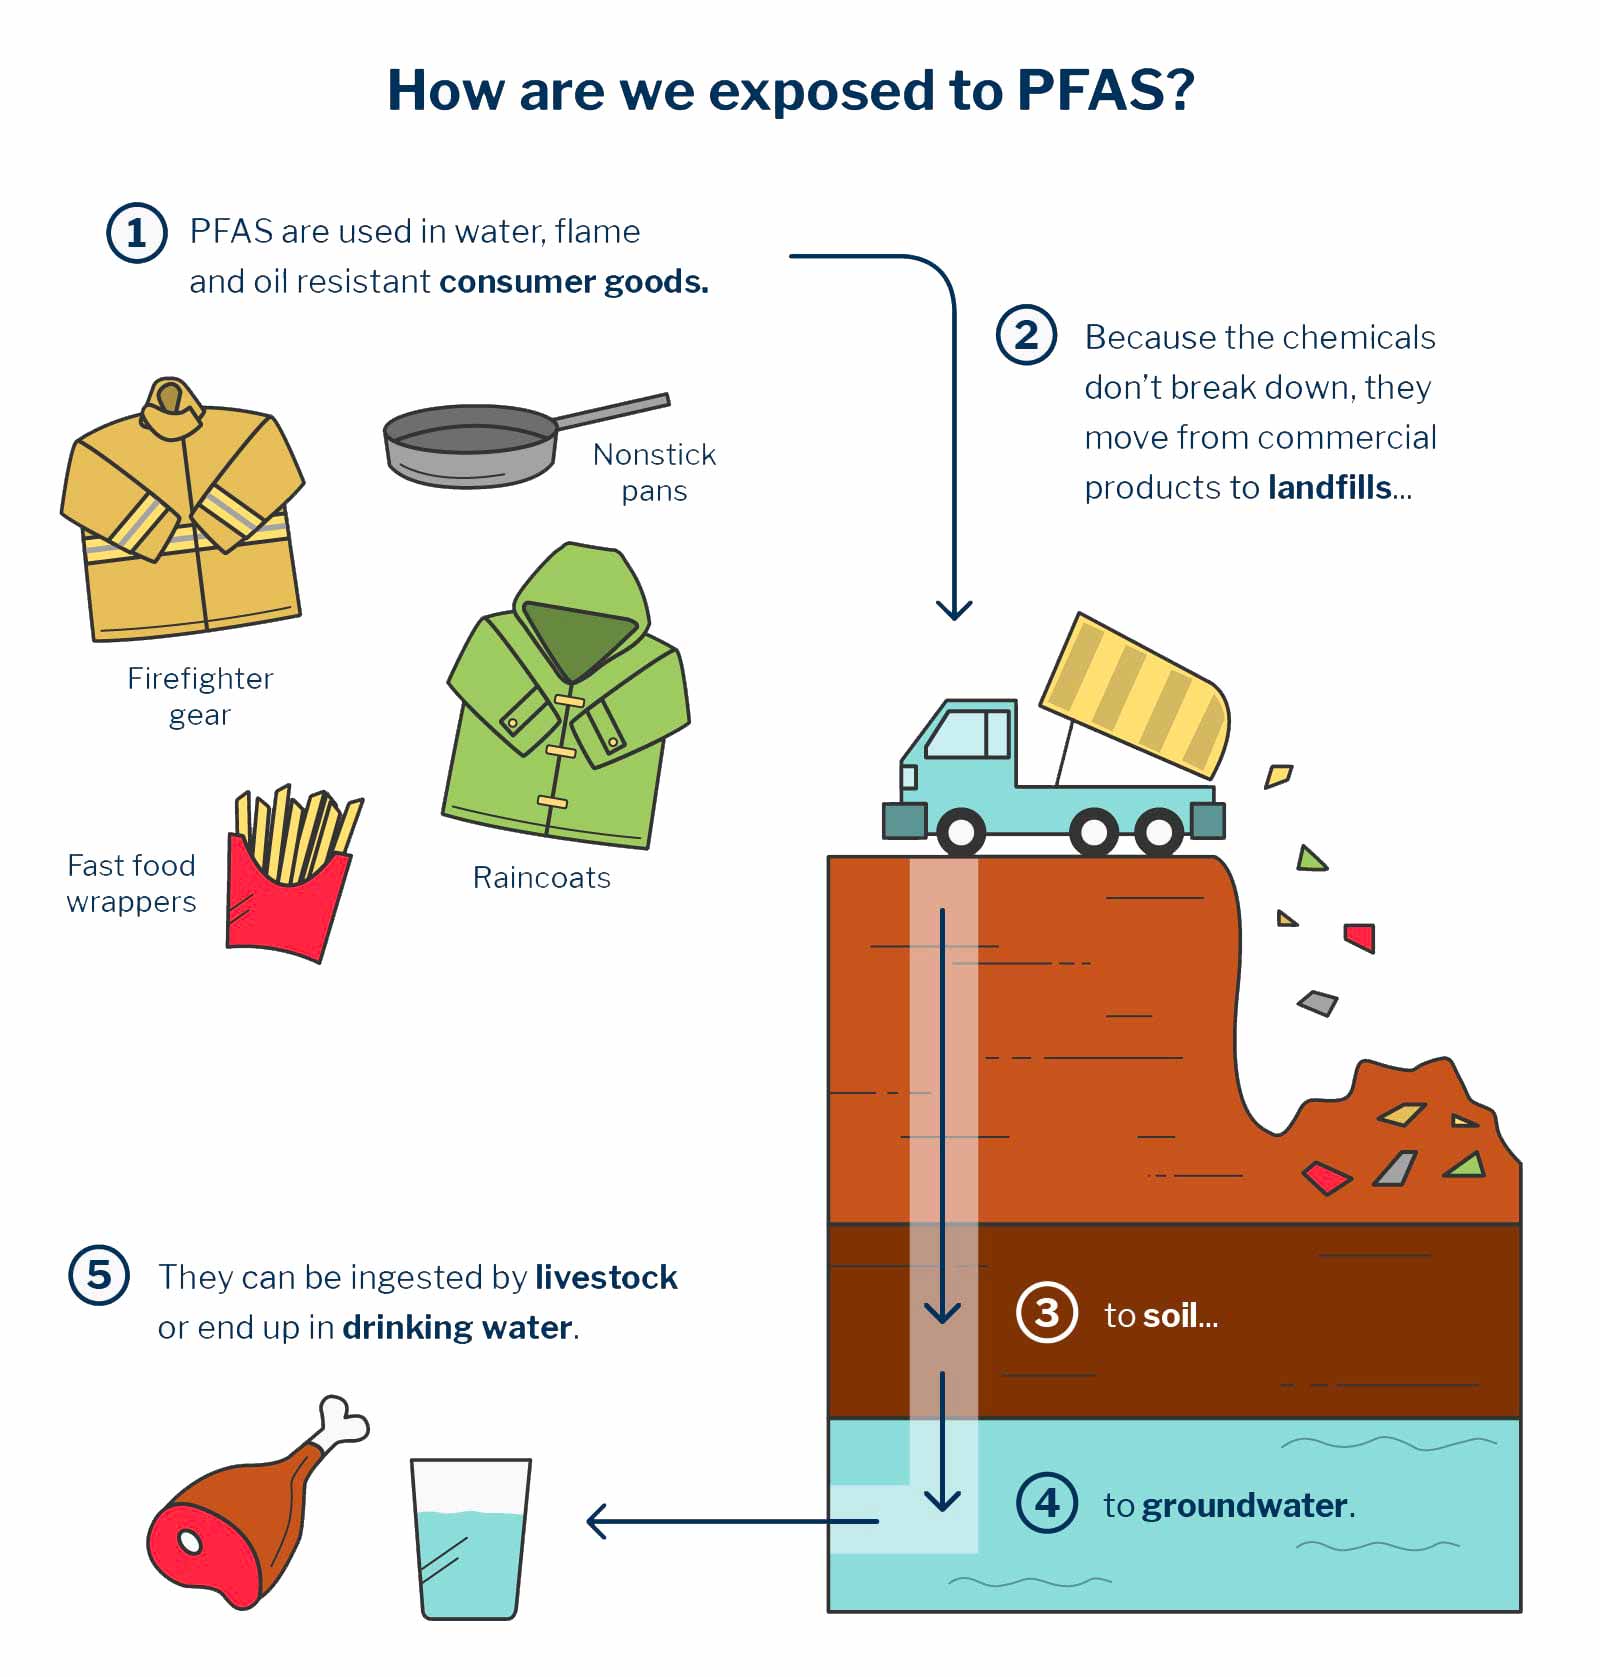 How are we exposed to PFAS? They are used in water, flame and oil resistant consumer goods. Because the chemicals don't break down, they move from commercial products to landfills, to soil, to groundwater. They can be ingested by livestock or end up in drinking water.